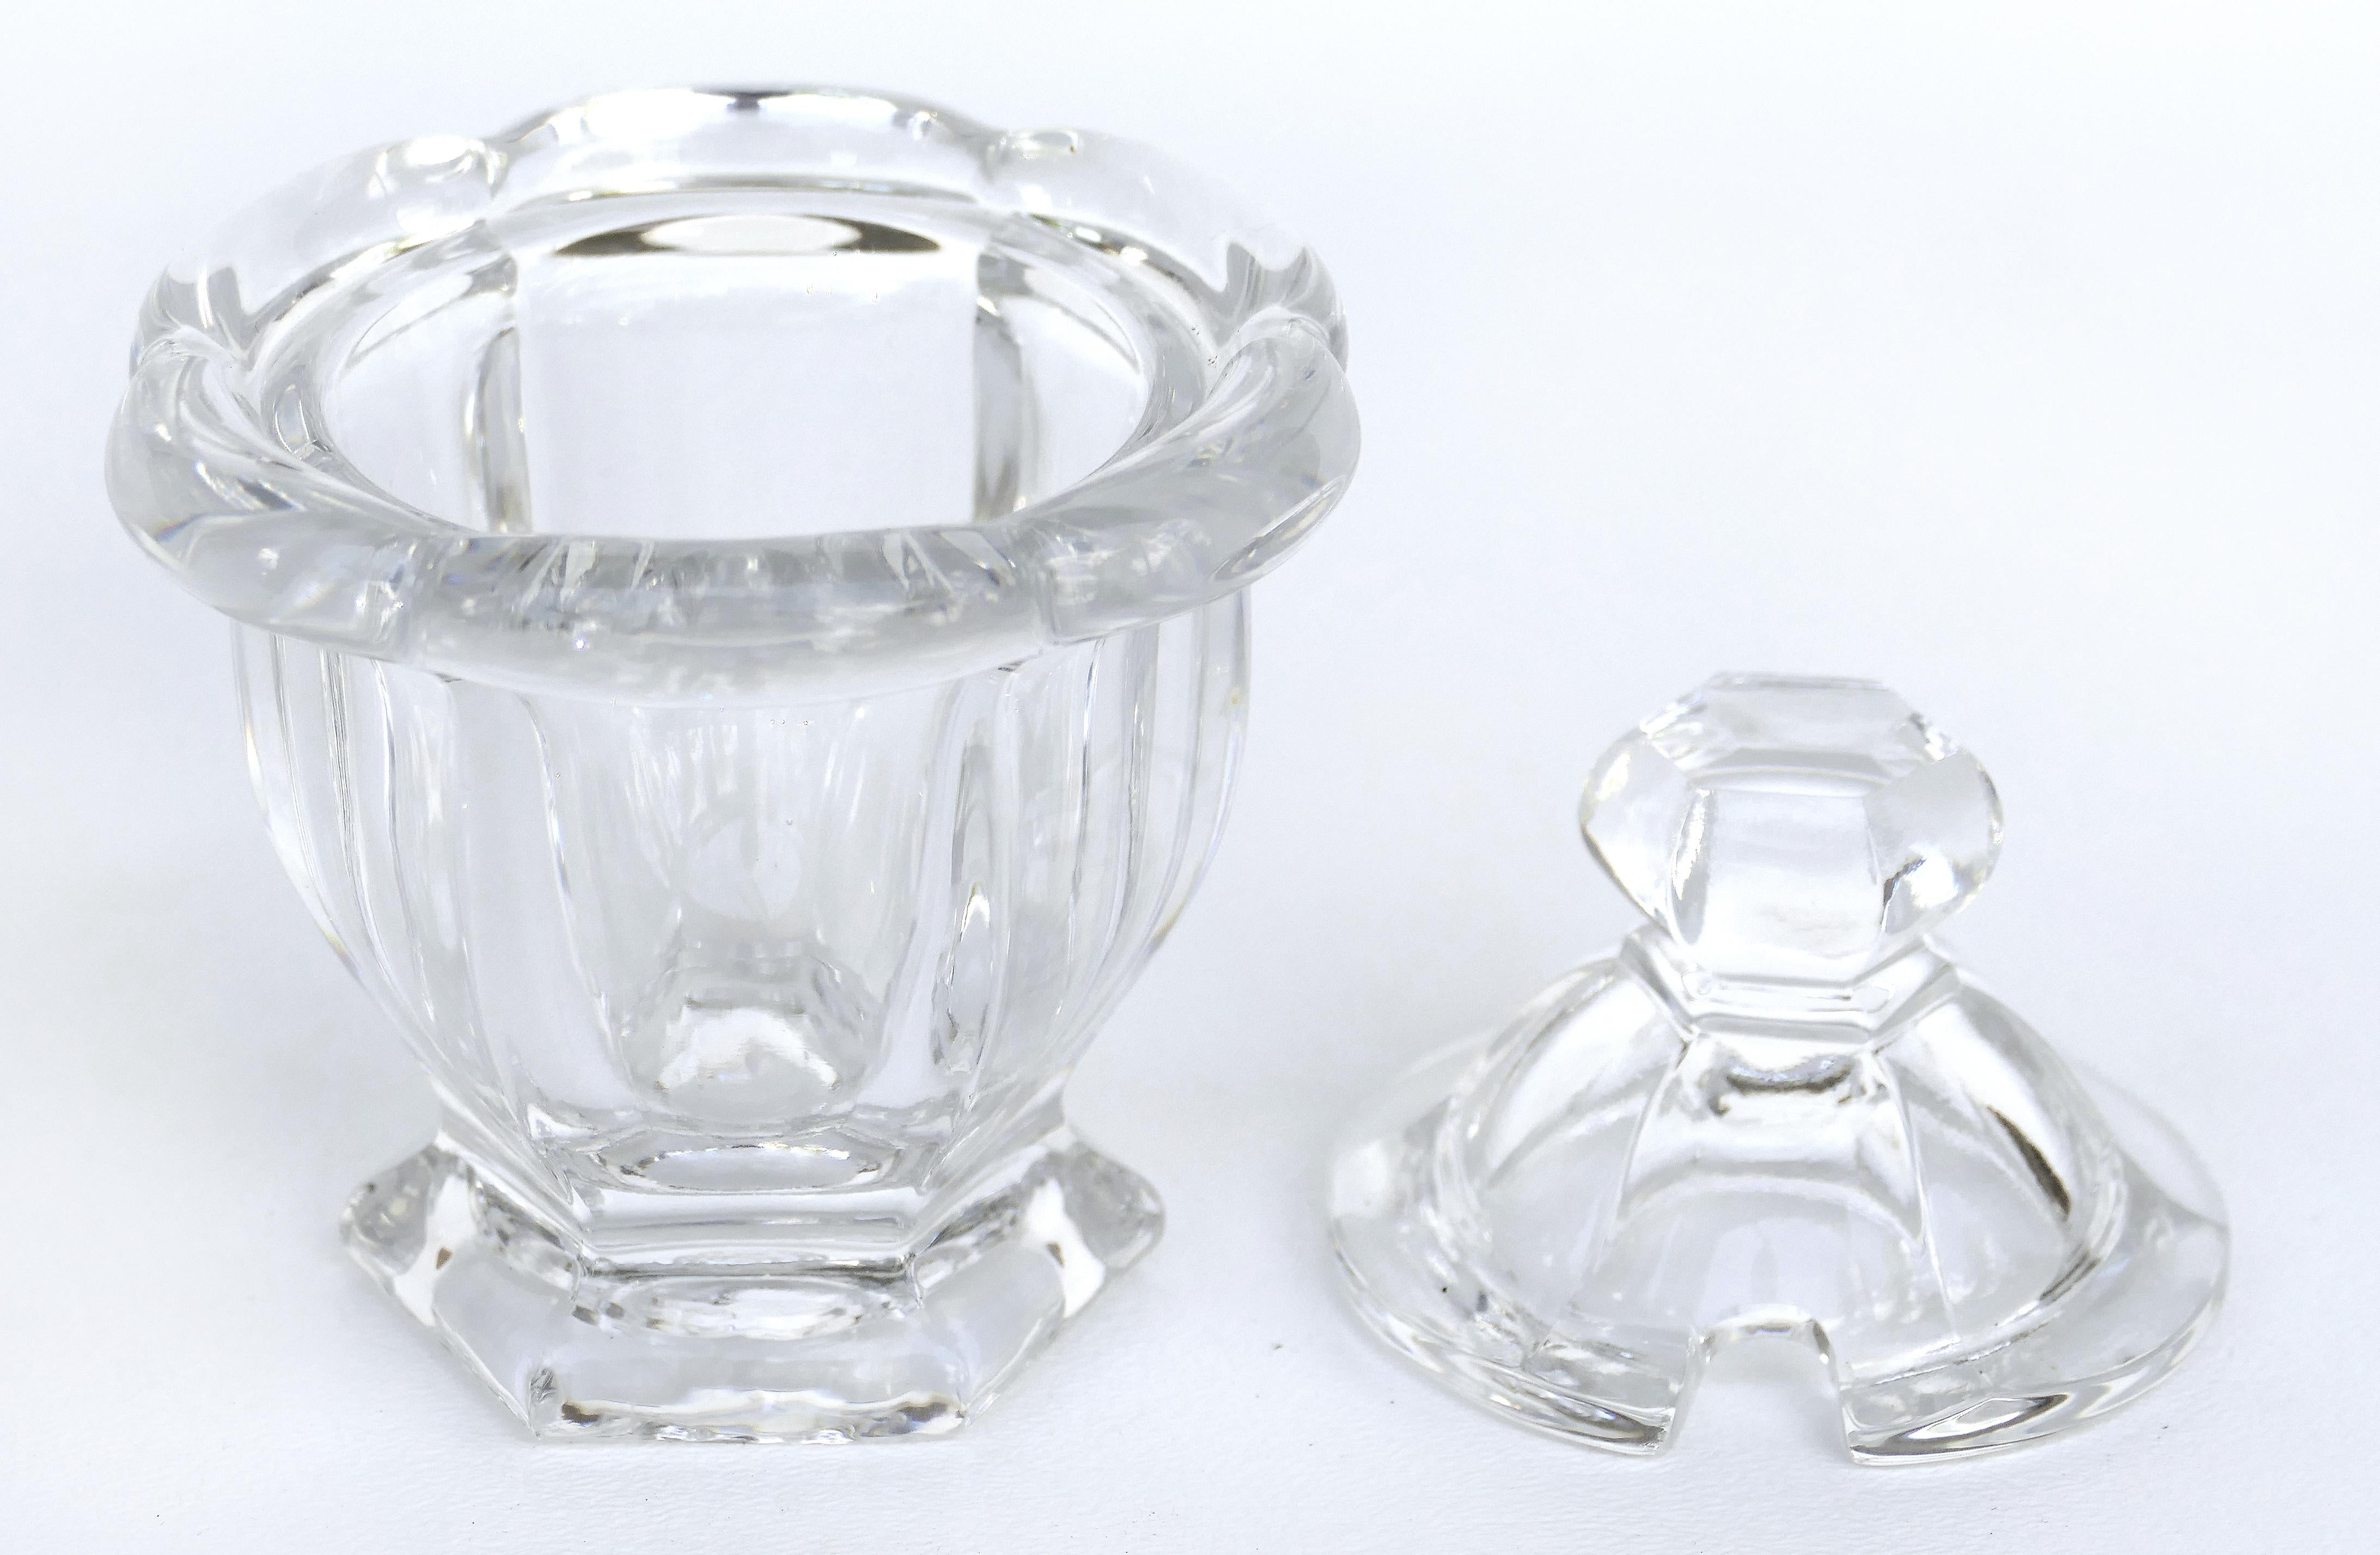 Baccarat France crystal covered mustard pot

Offered for sale is a Baccarat crystal covered mustard pot. The lid has a notched opening for a spoon which is not included. The base has the Baccarat stamp on the underside as pictured.